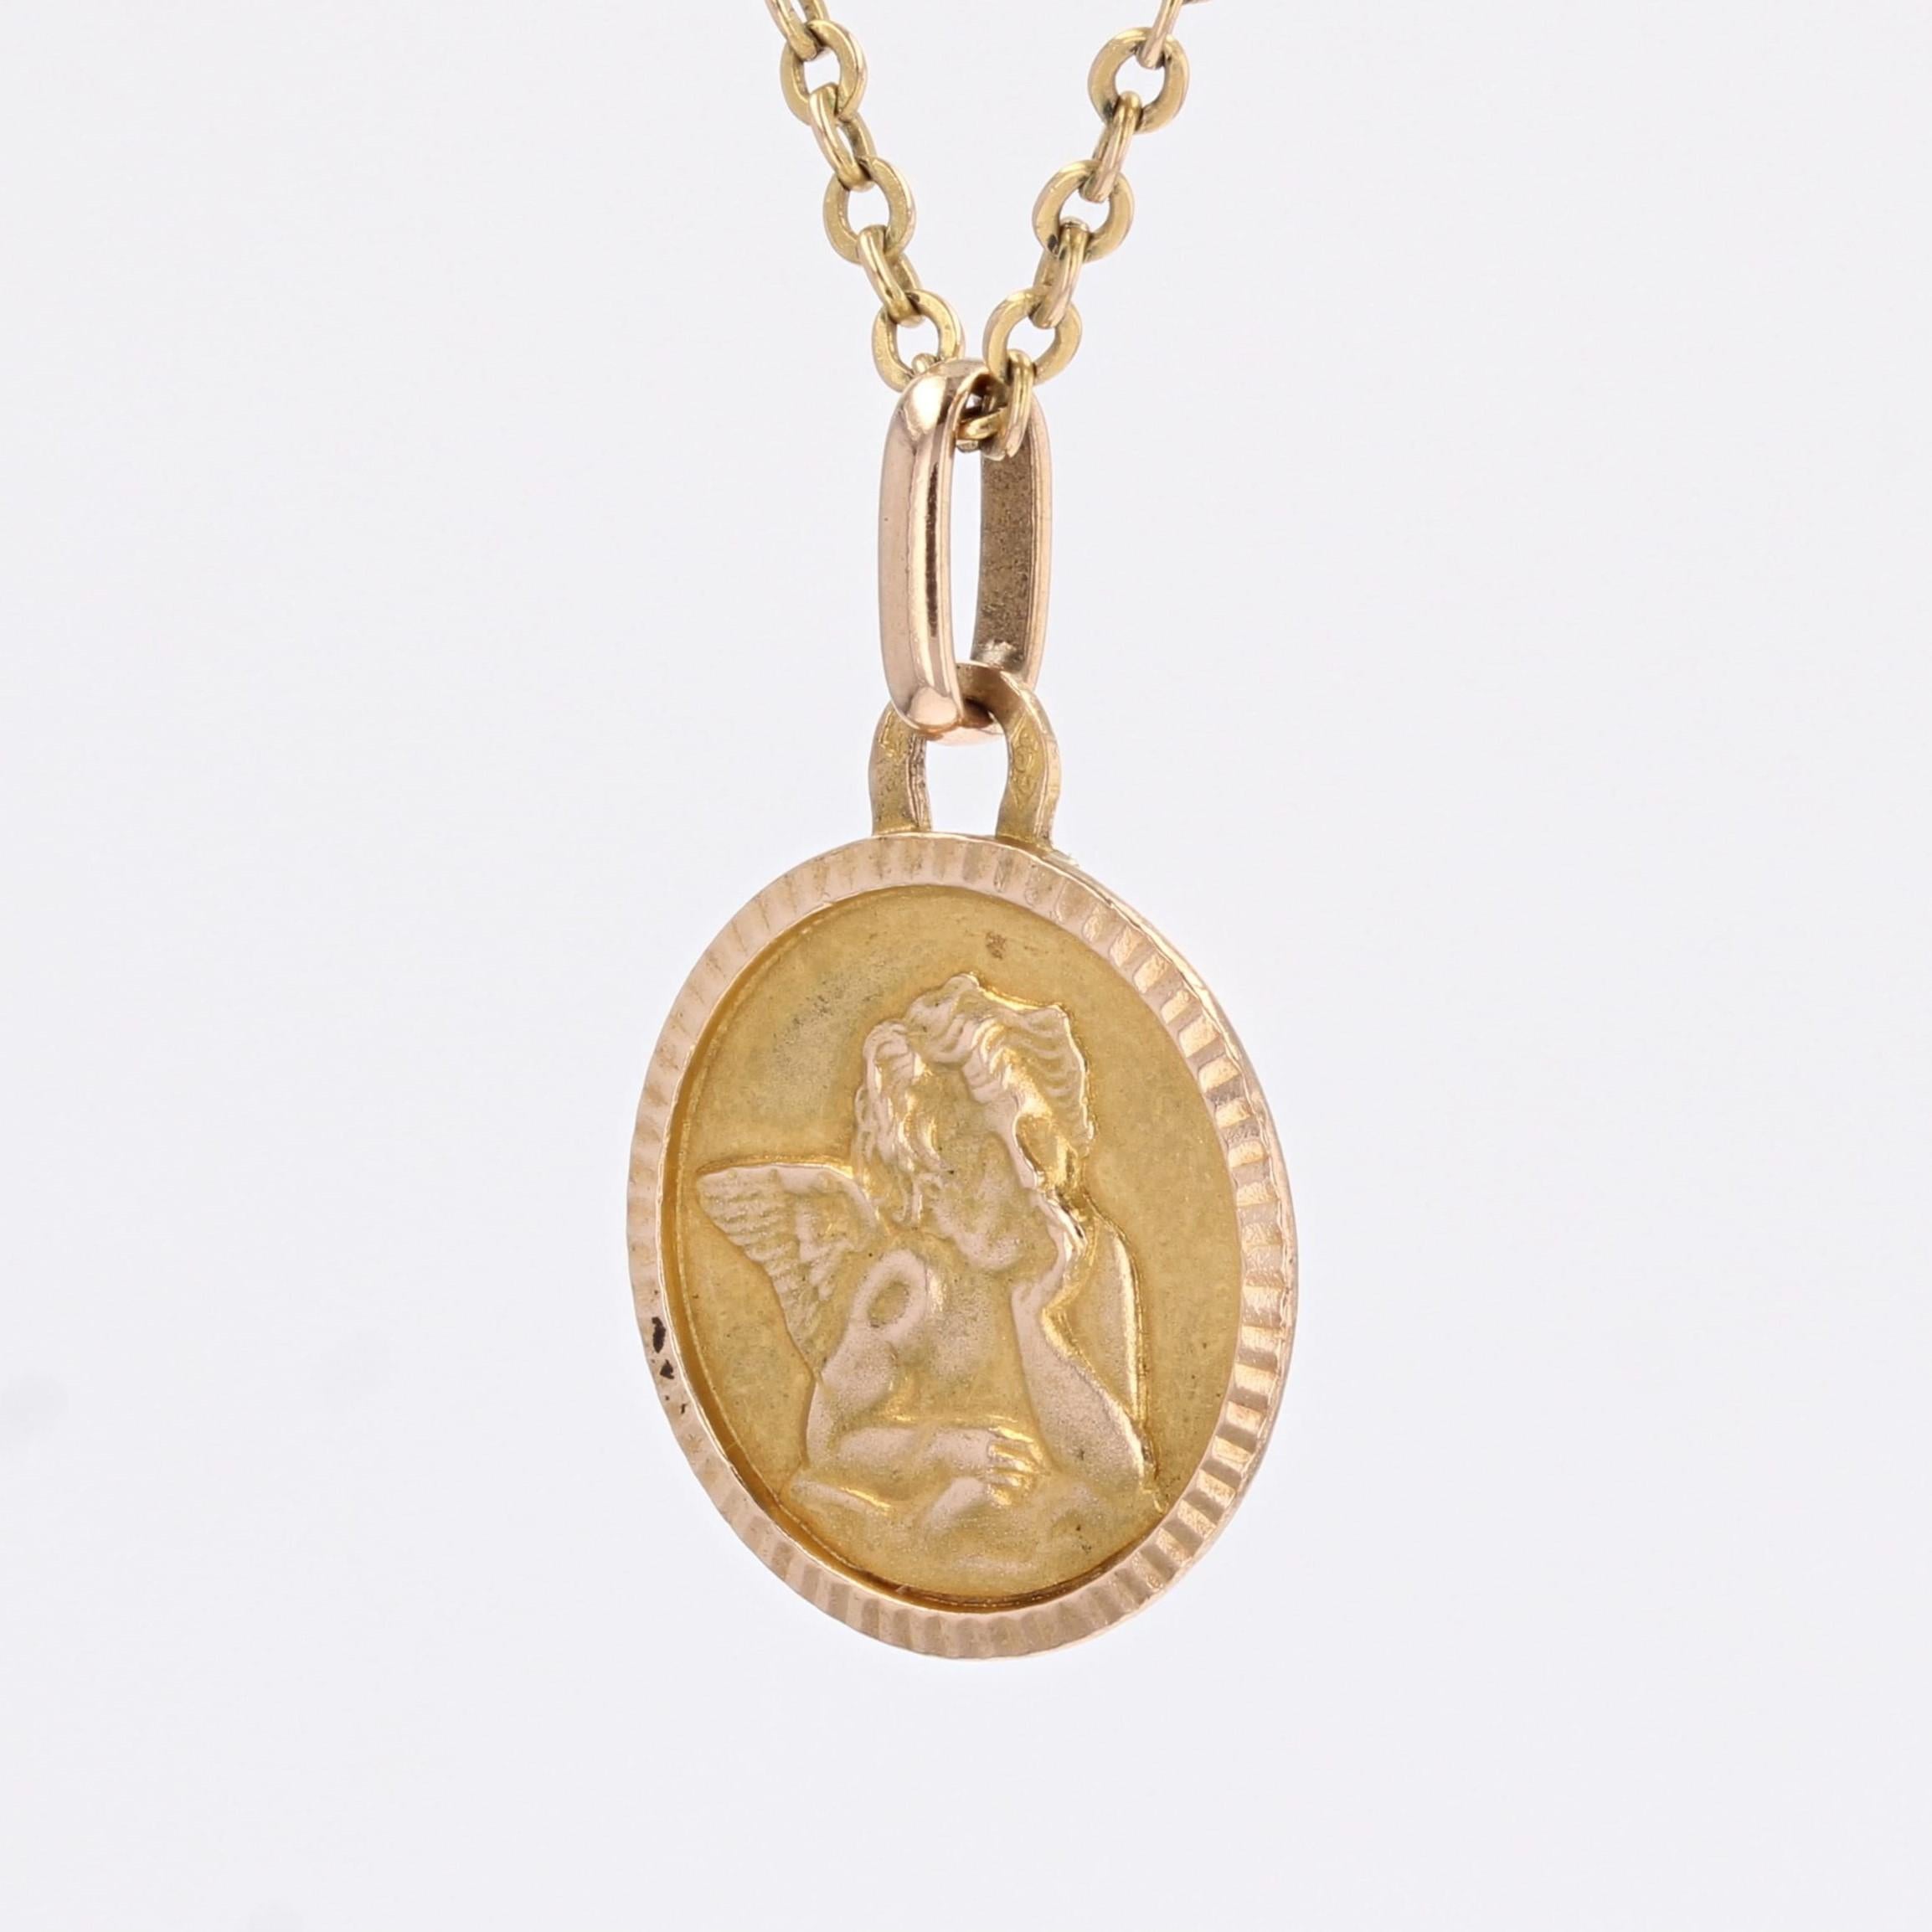 Antique 18 Karat Rose Gold Cherub Medal Pendant In Good Condition For Sale In Poitiers, FR